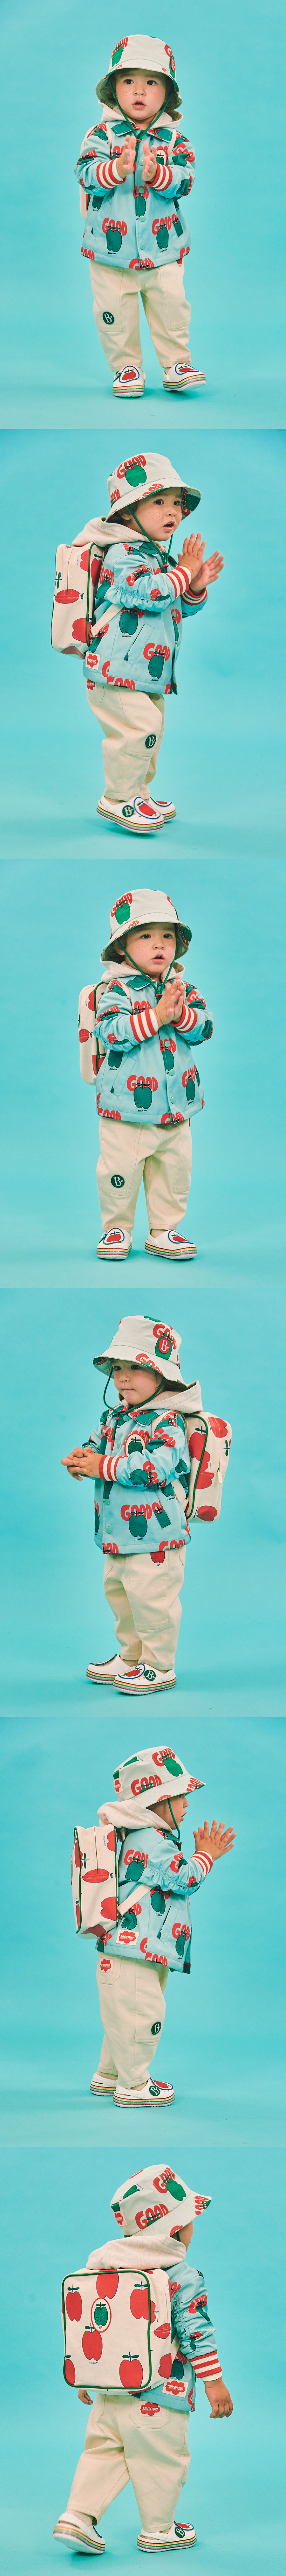 All over good apple baby hooded coach jacket 상세 이미지